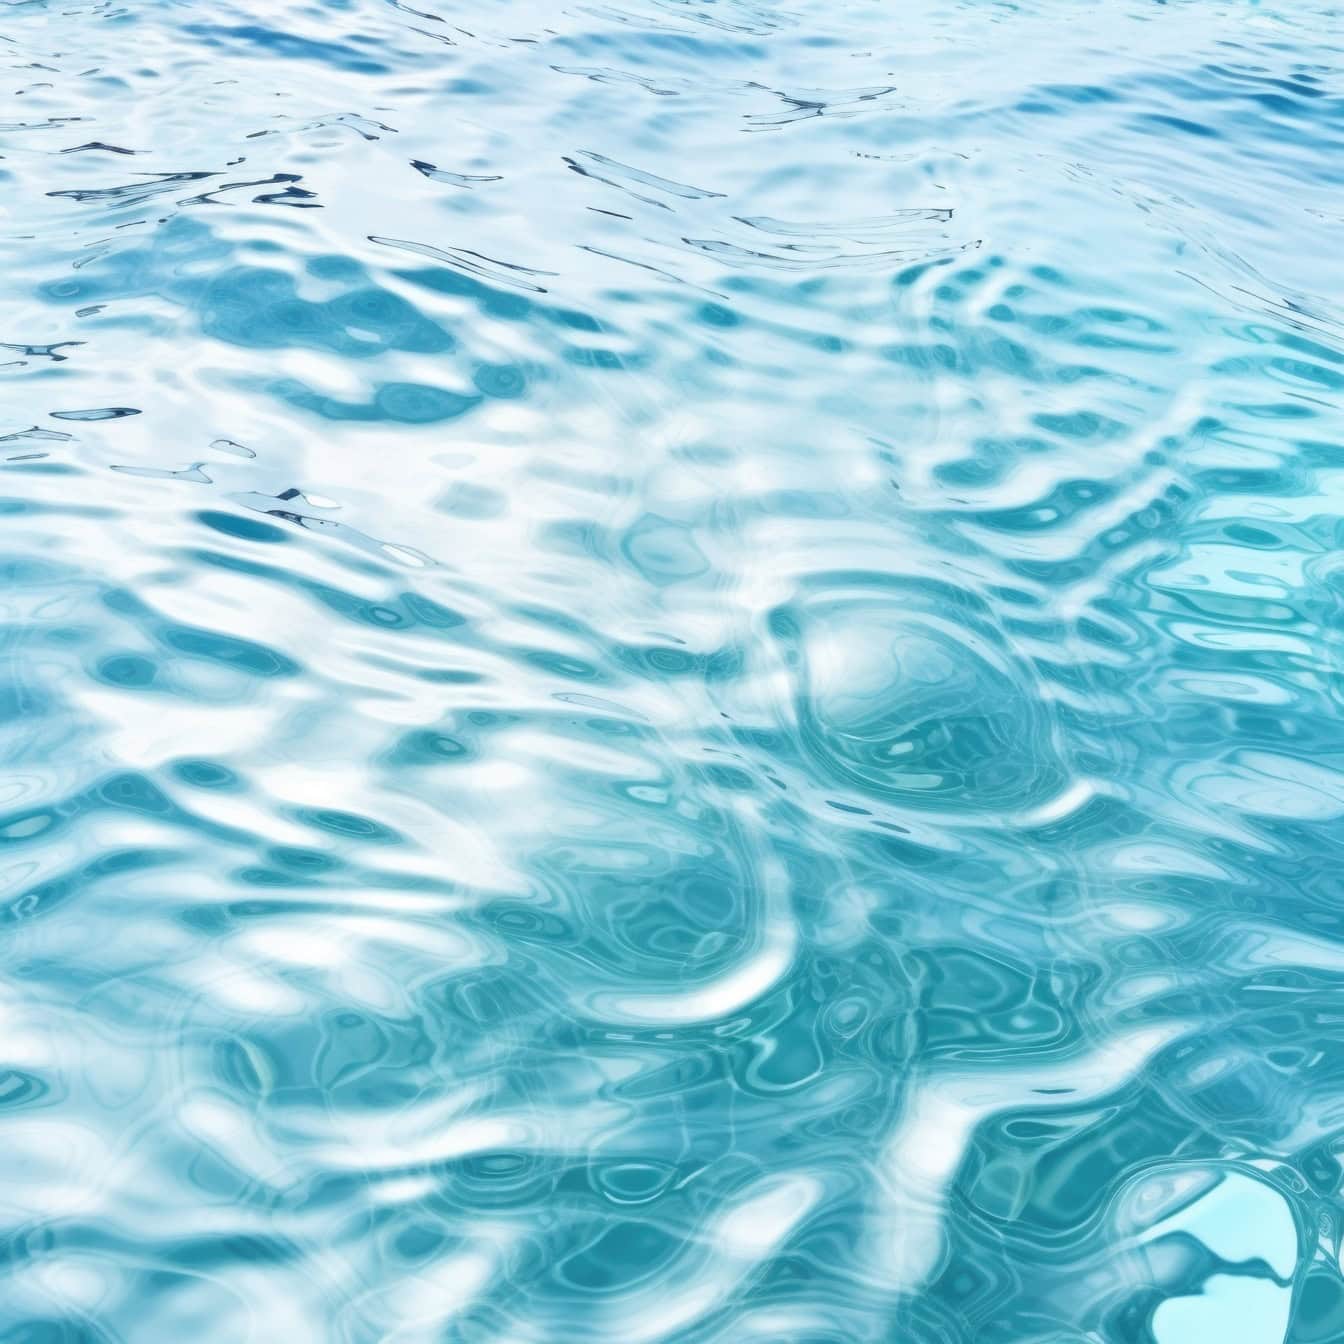 Close-up of a surface of turquoise blue water with ripple of waves